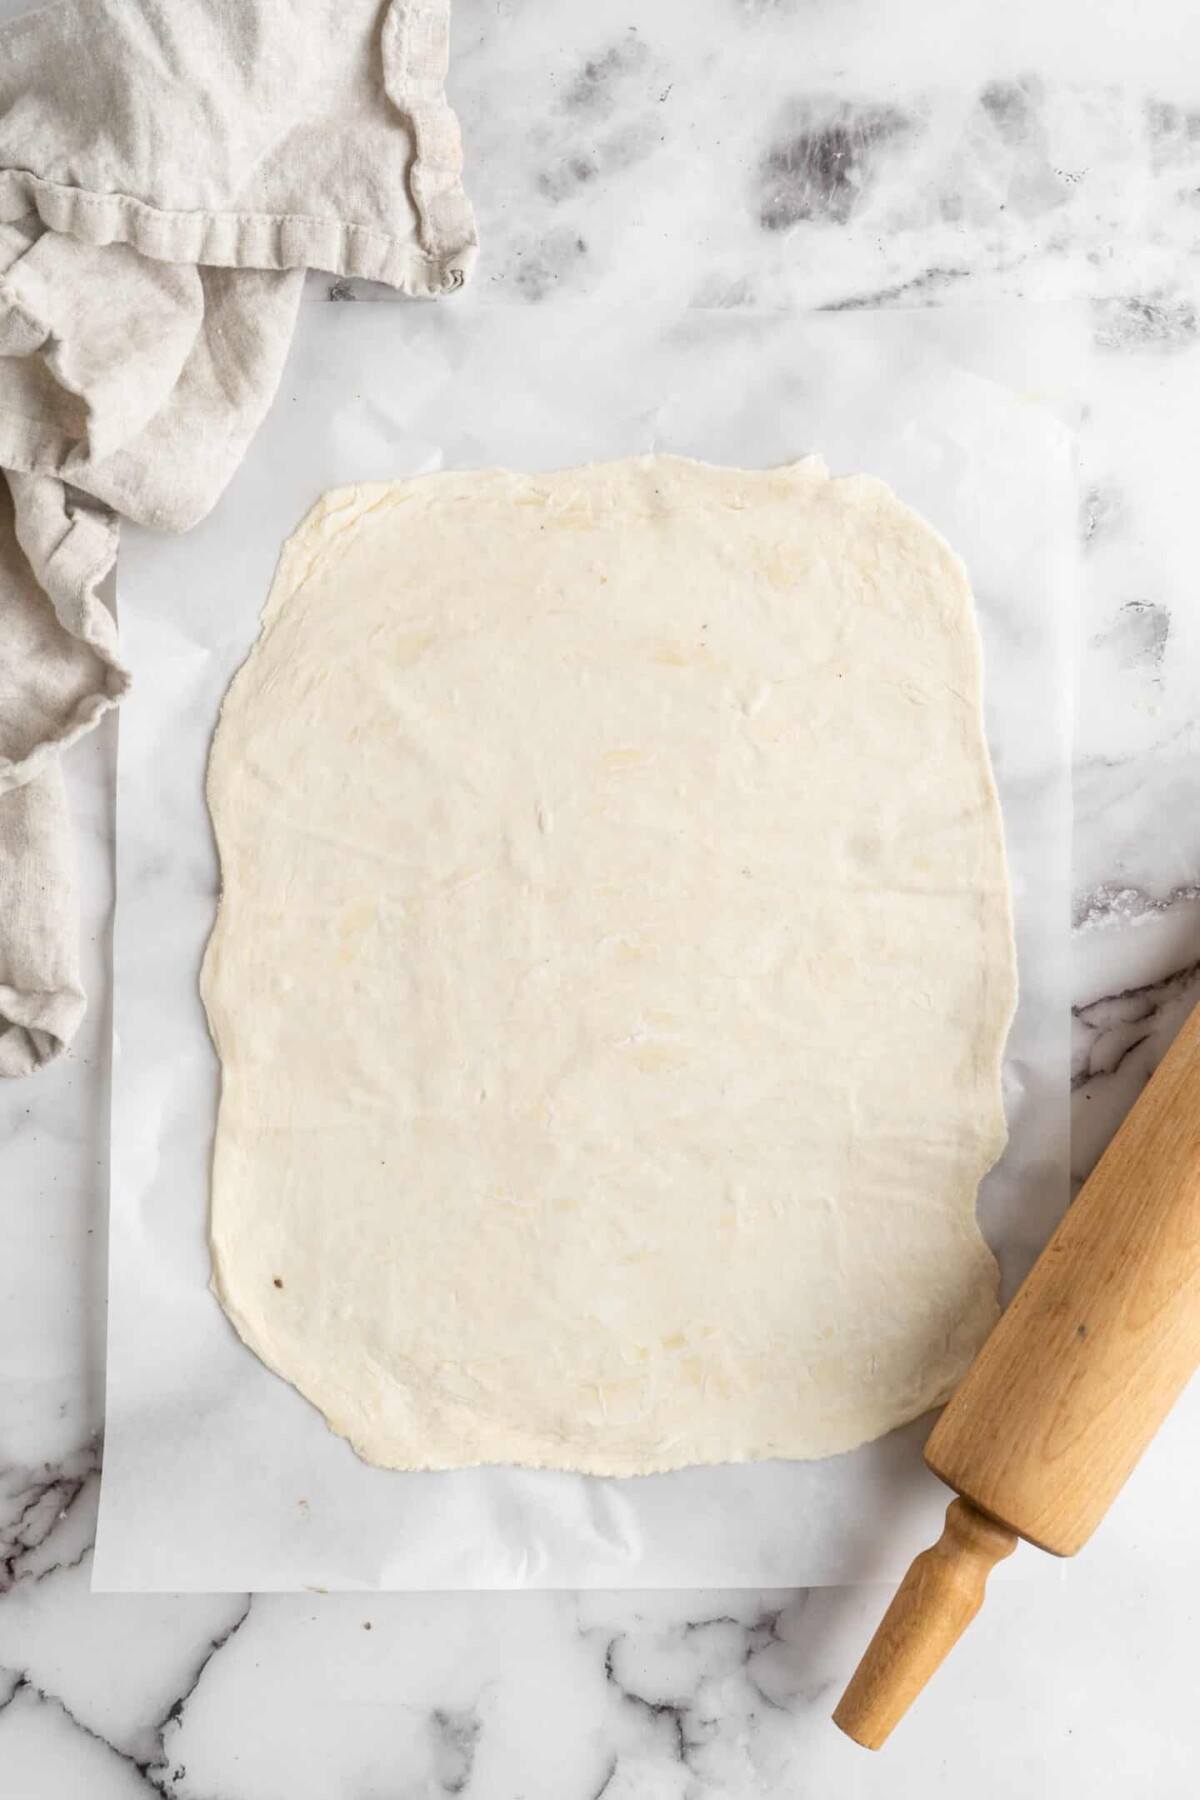 A sheet of puff pastry rolled into a rectangle, next to a kitchen towel and a rolling pin